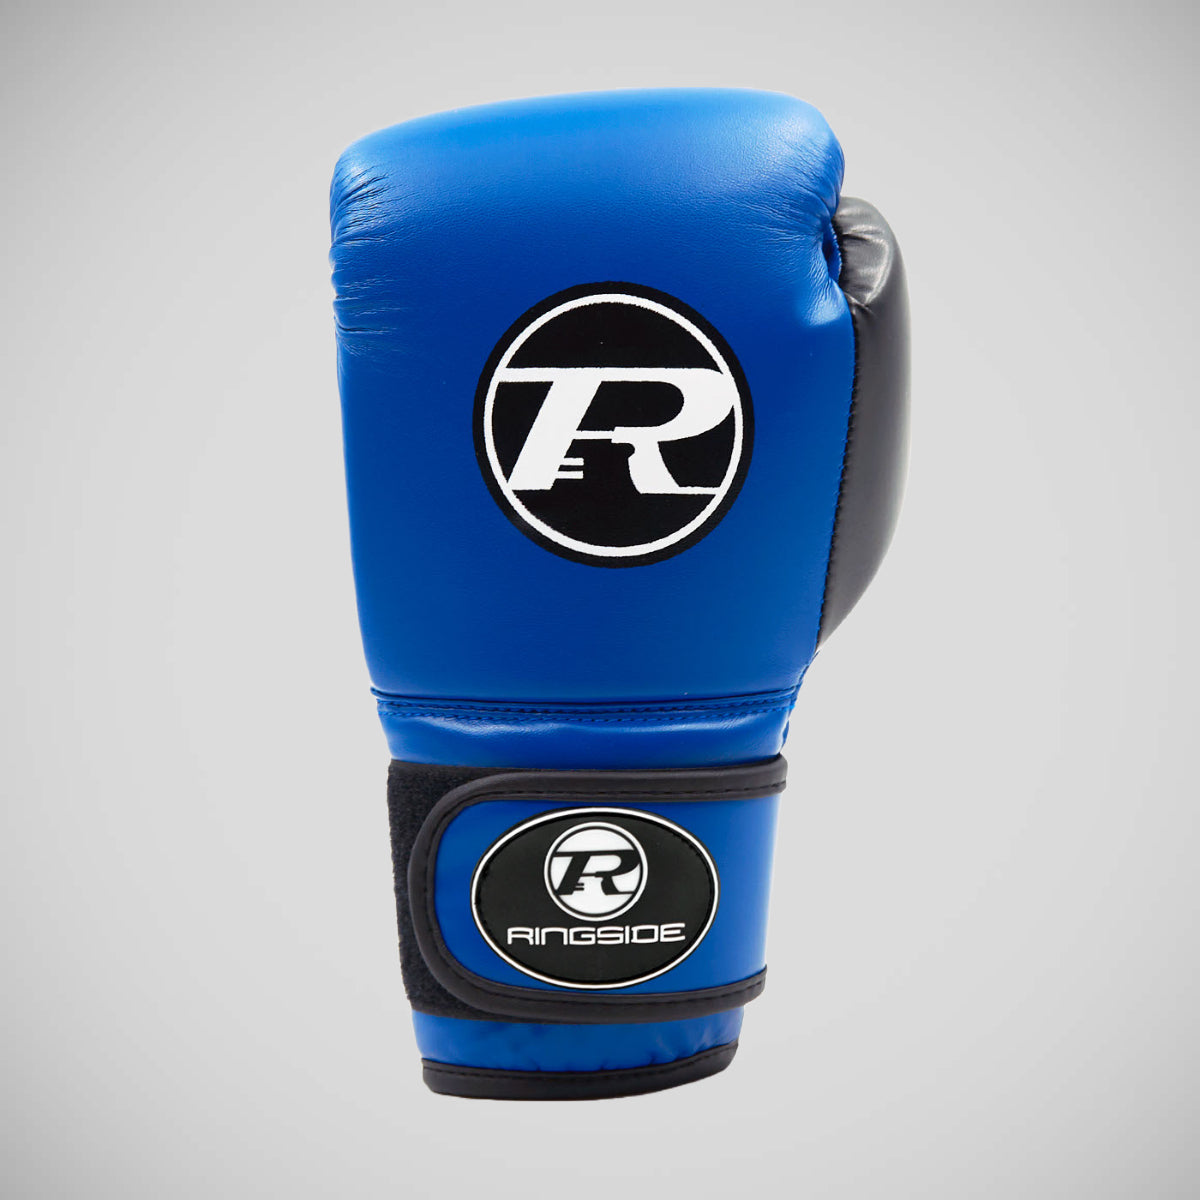 Ringside Boxing Gloves, Punch Bags and Headguards from Made4Fighters